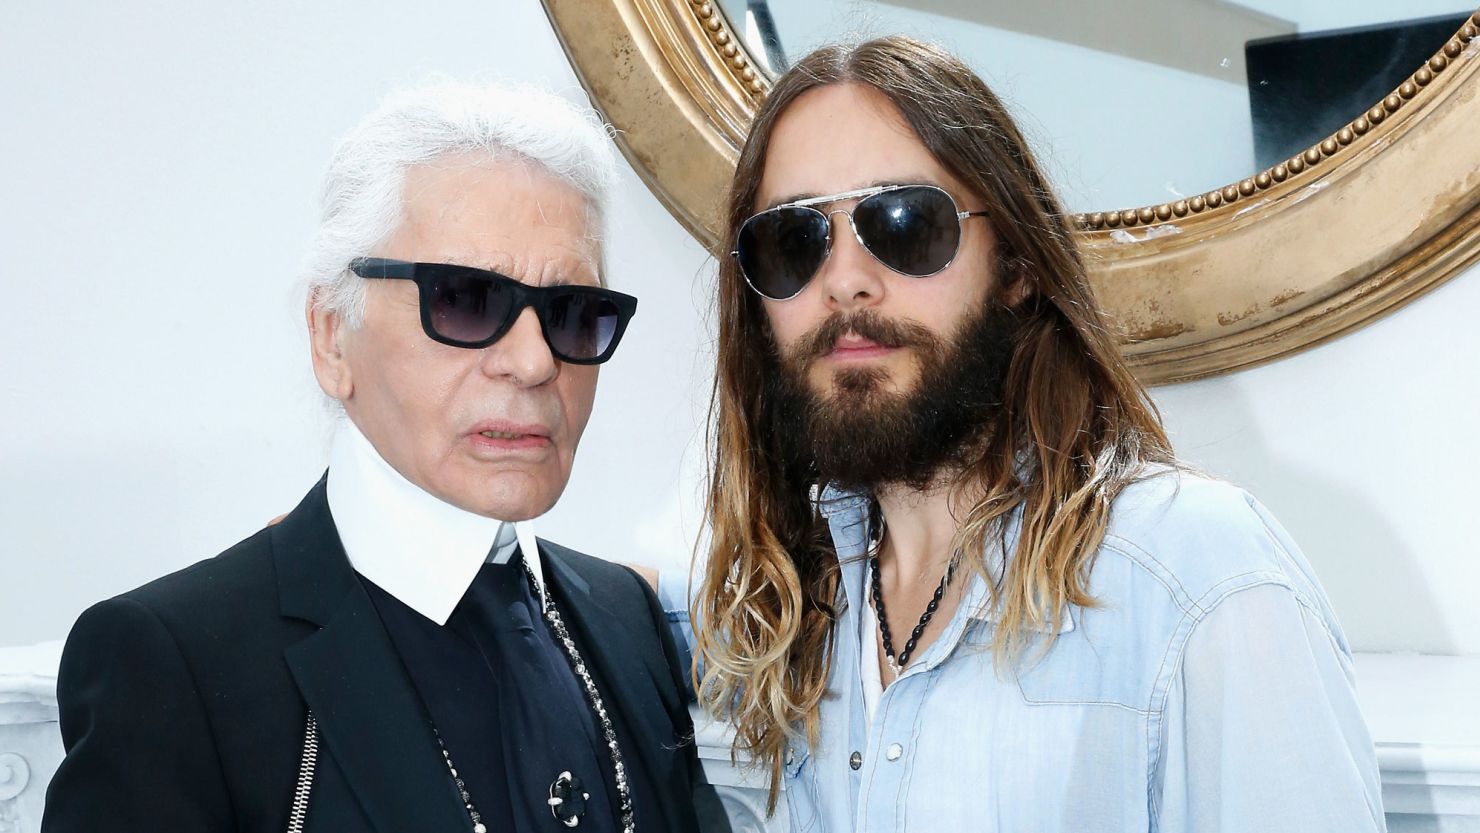 Karl Lagerfeld with actor Jared Leto in 2014. Leto will play the late designer in an upcoming film.